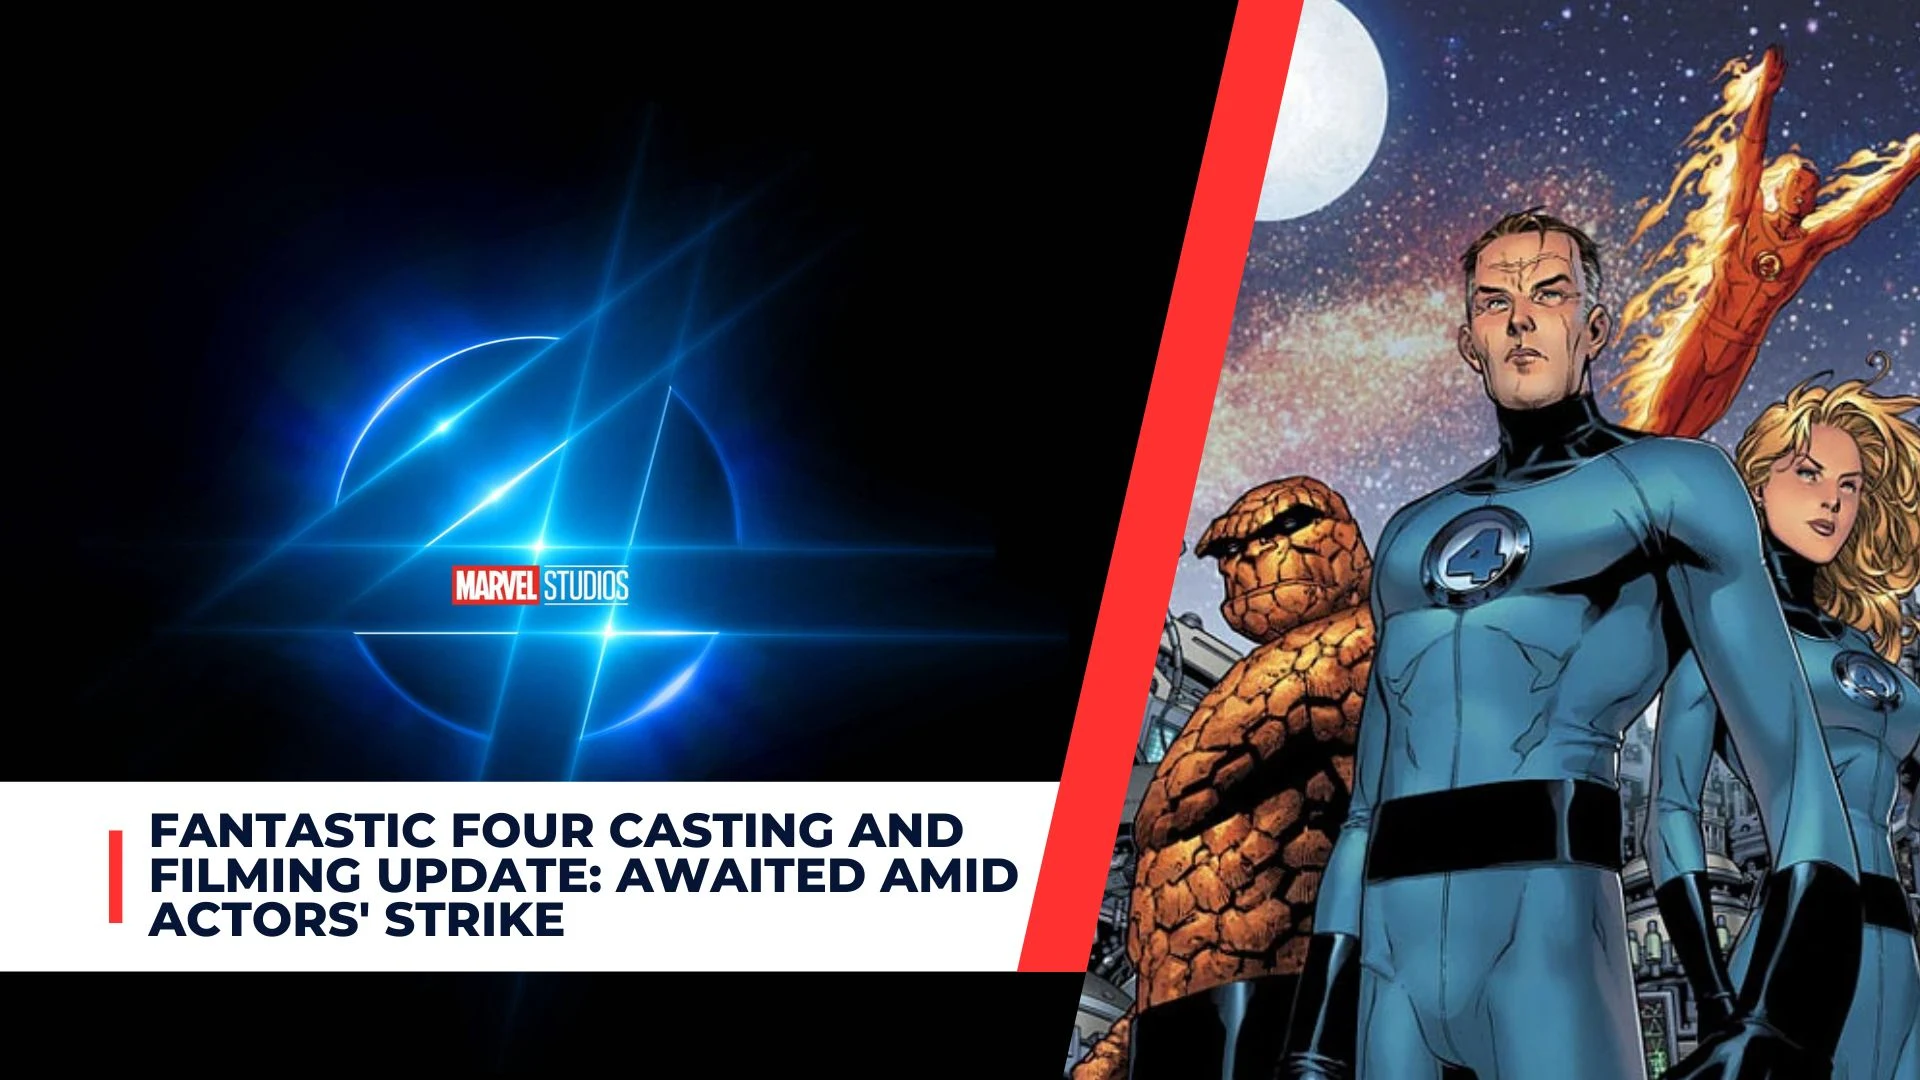 Fantastic Four Casting and Filming Update Awaited Amid Actors' Strike